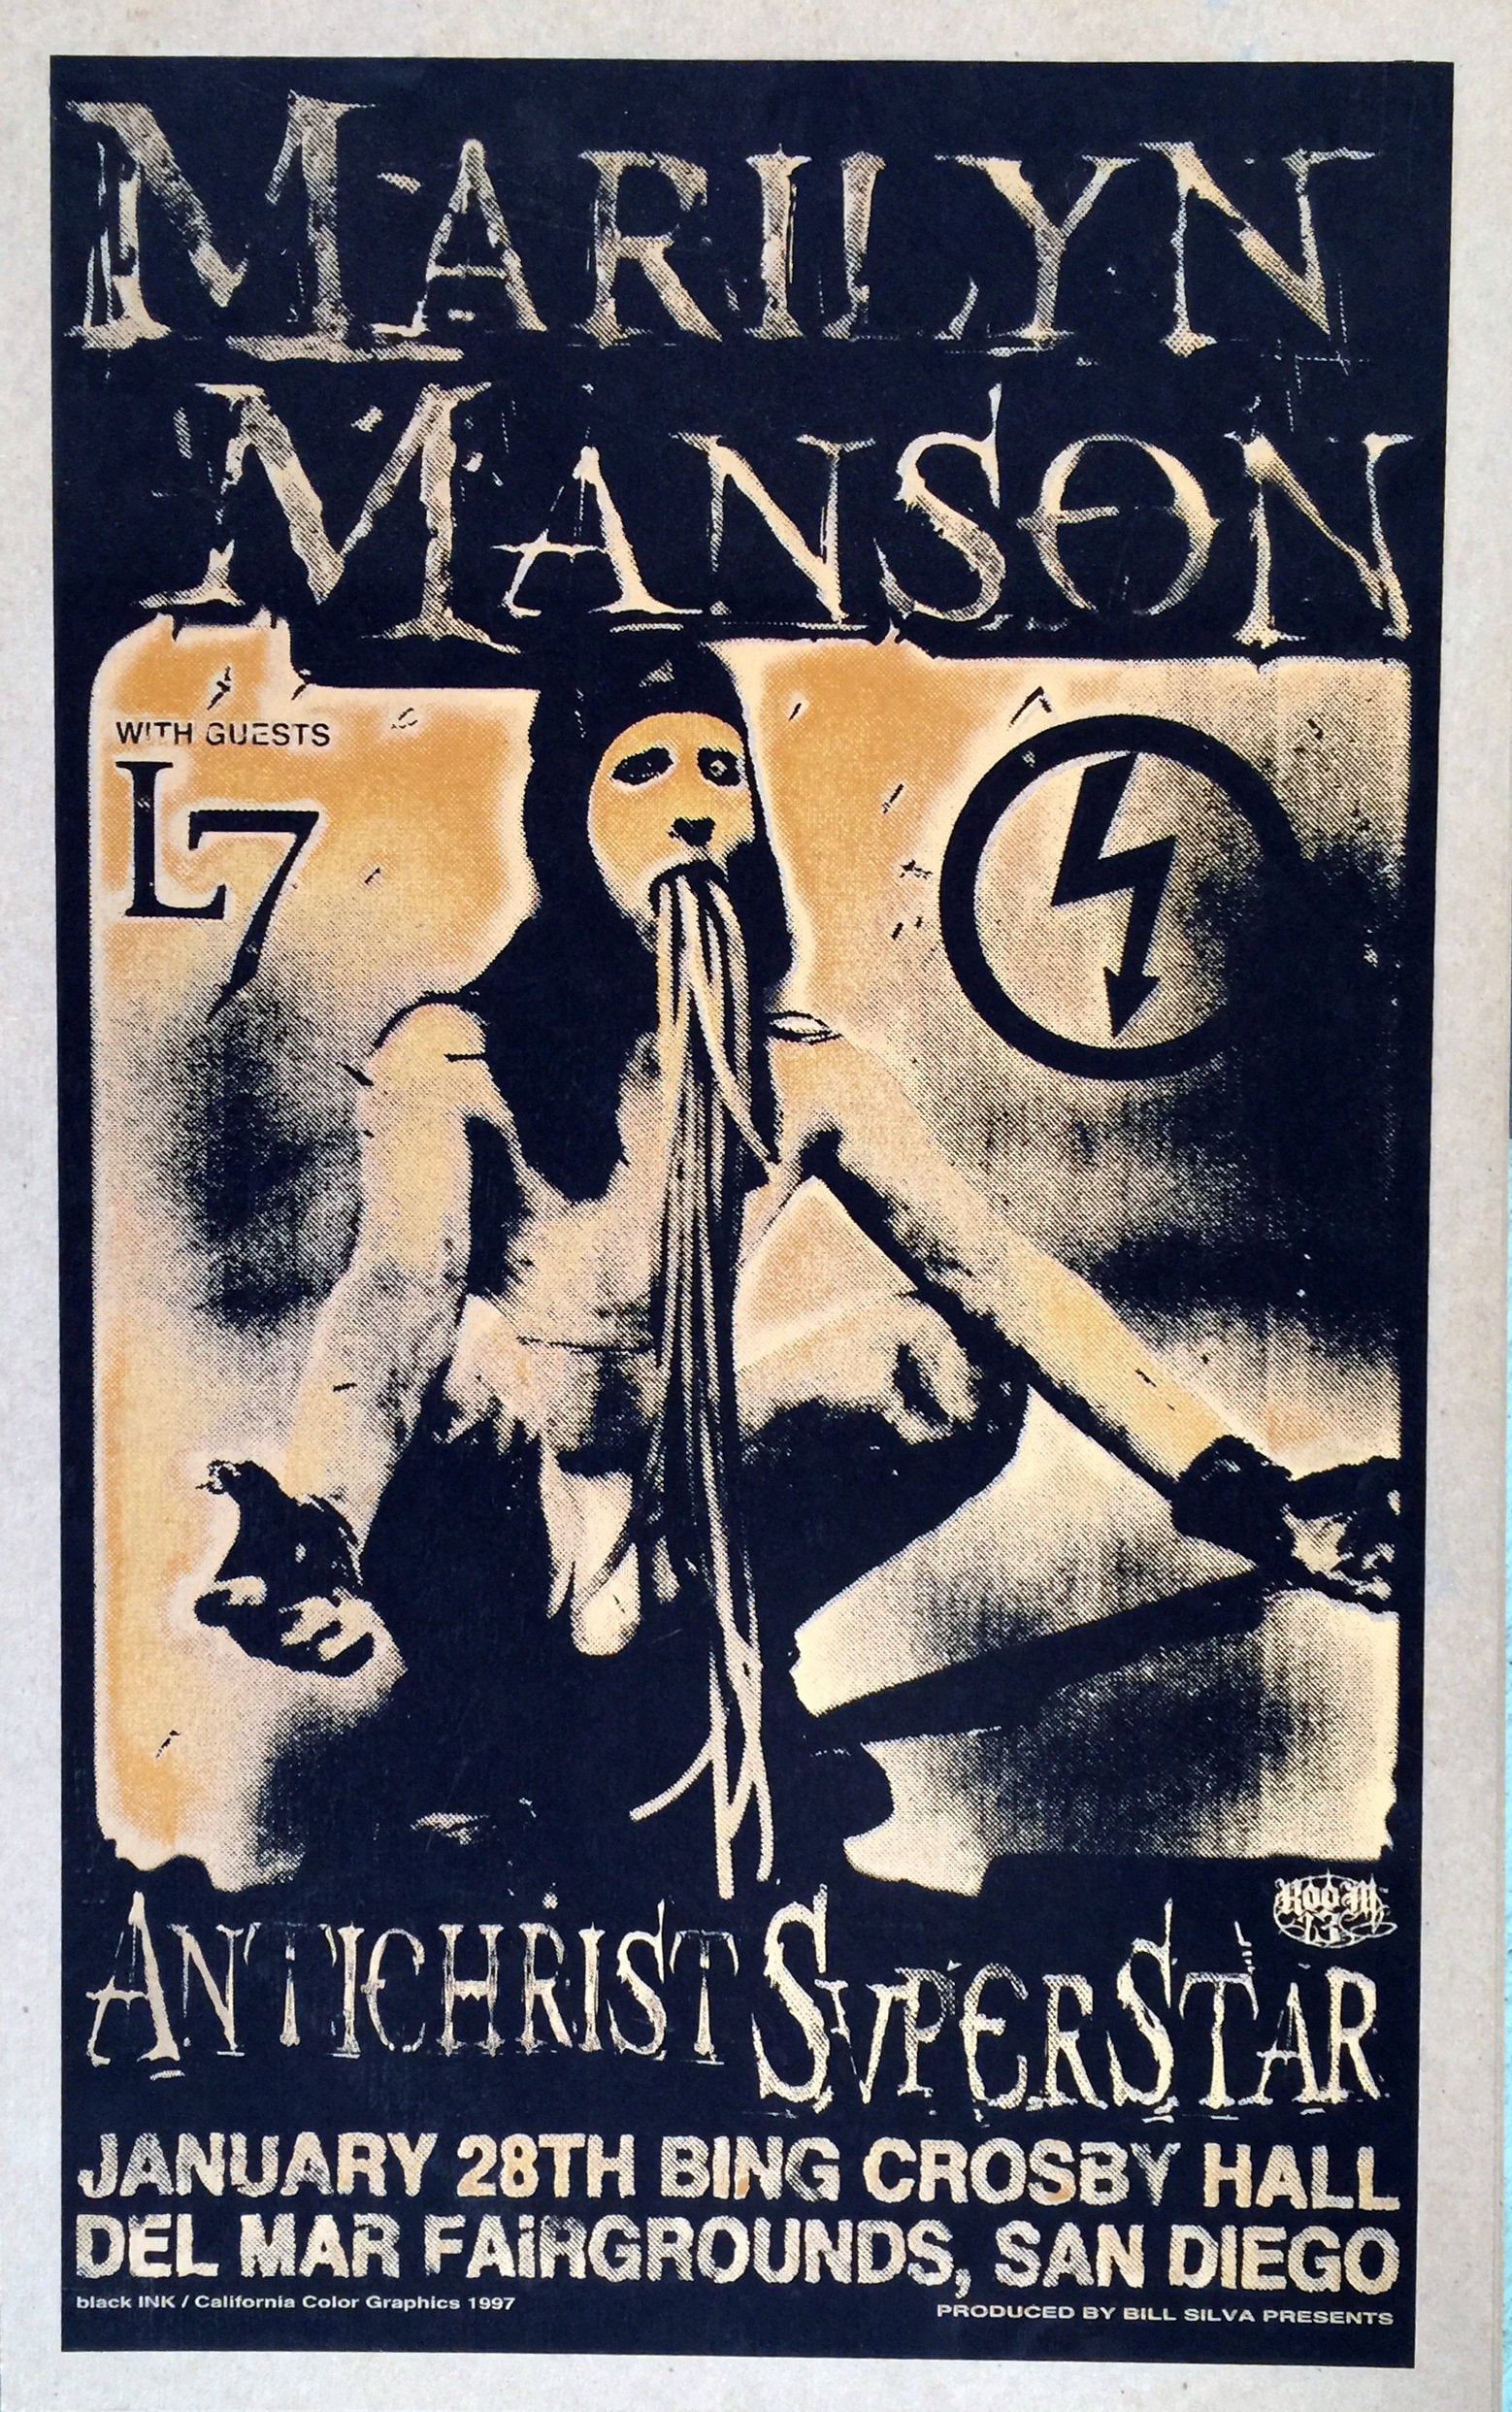 POSTER - Vintage, rare MARILYN MANSON poster, limited edition, silkscreened